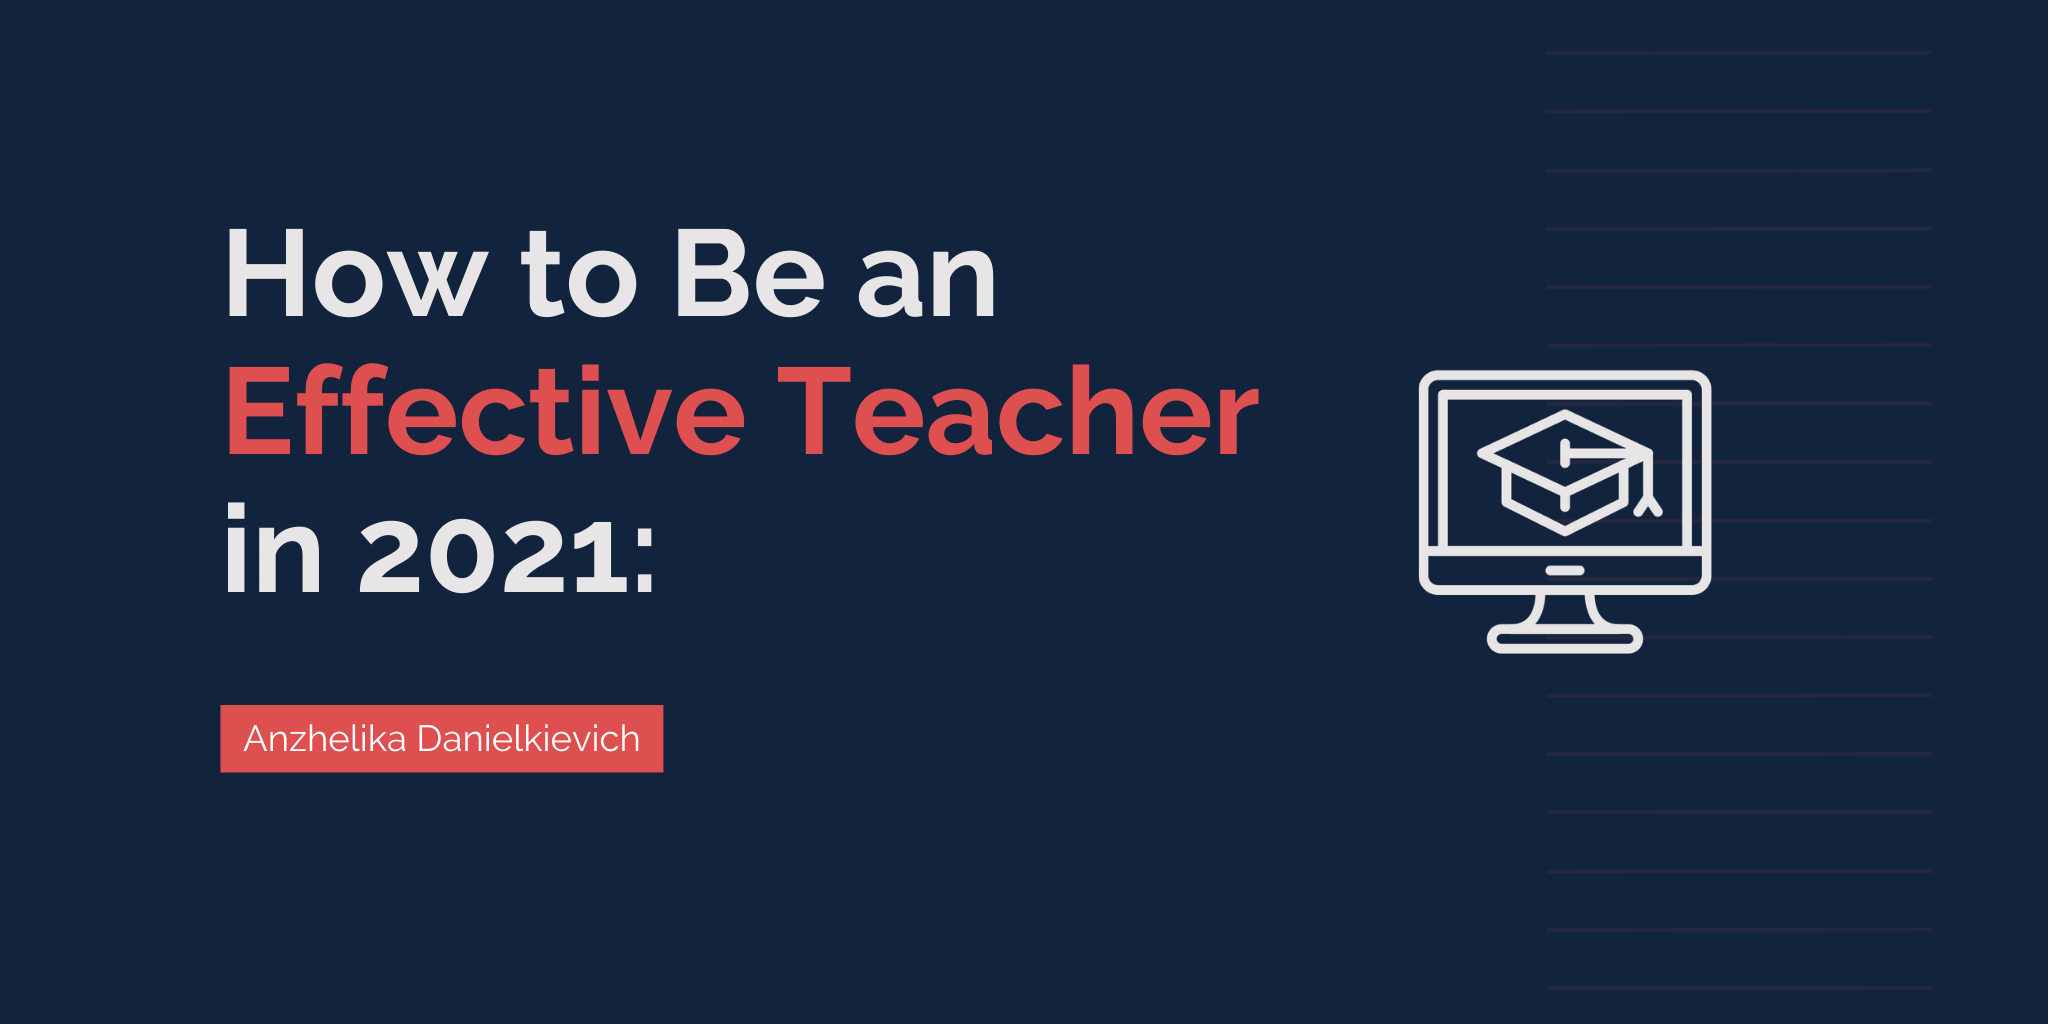 How to Be an Effective Teacher in 2021: Covid-19, Distance Learning, and Virtual Classroom